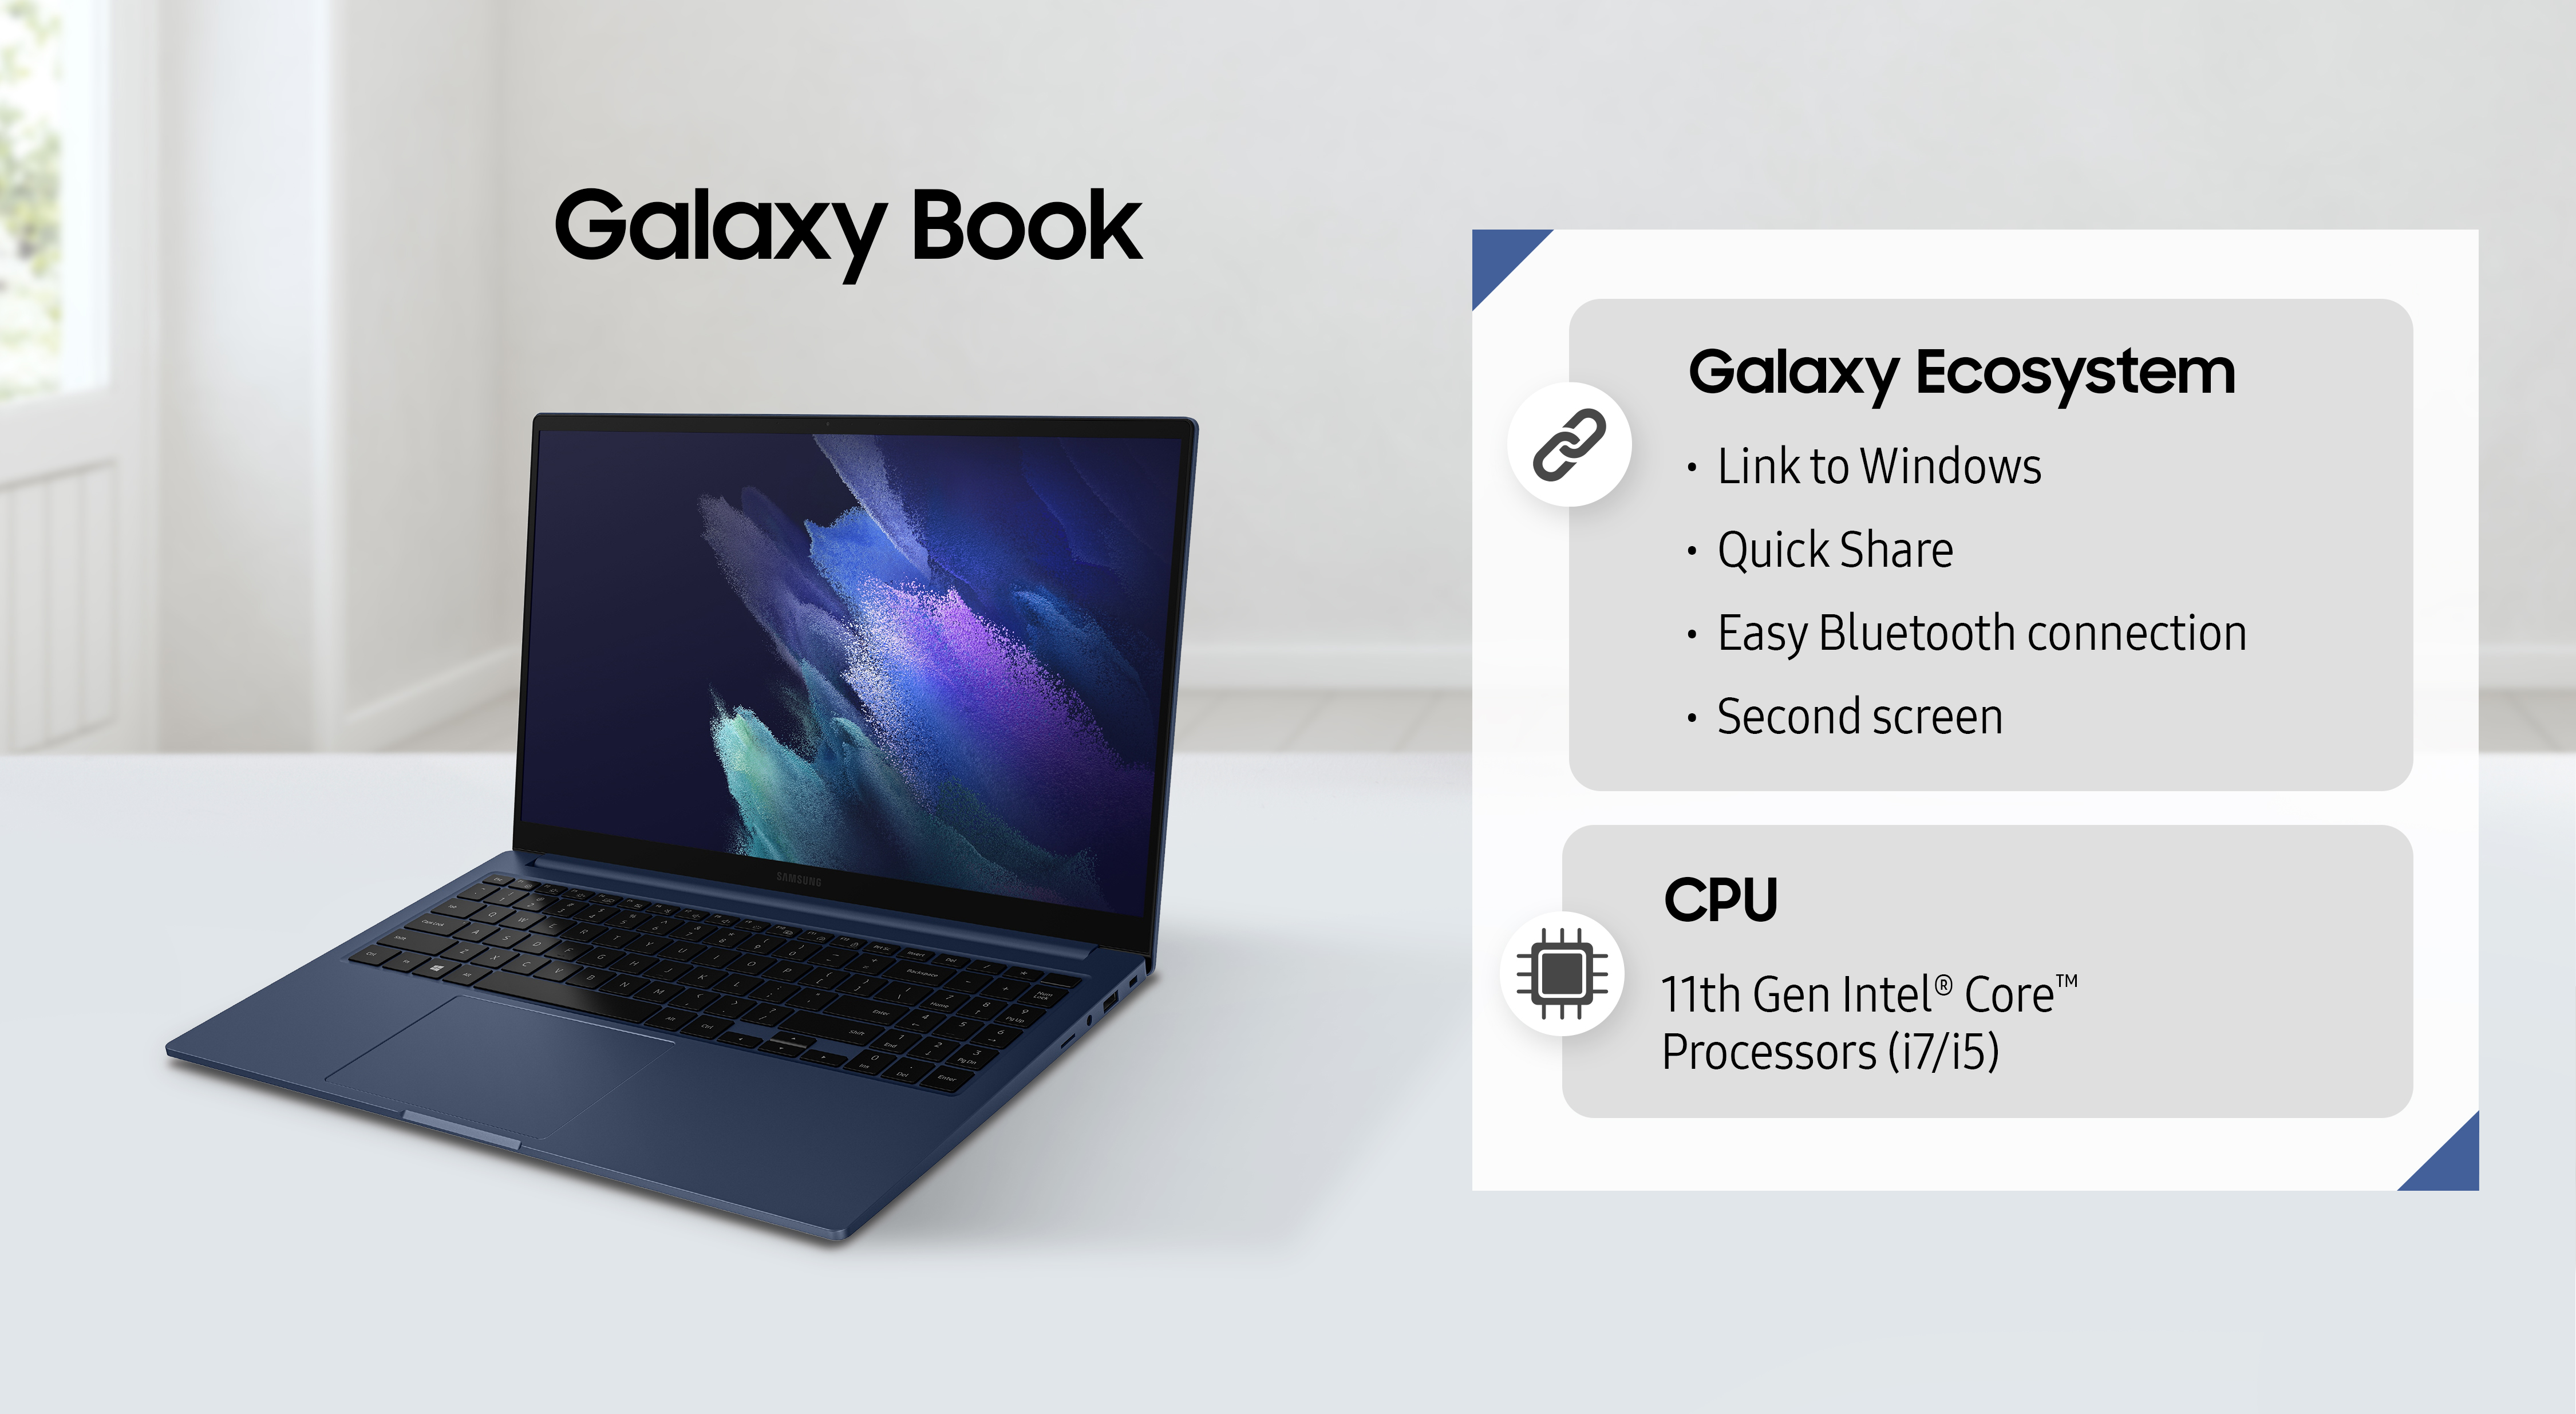 Galaxy Book infographic with key specs